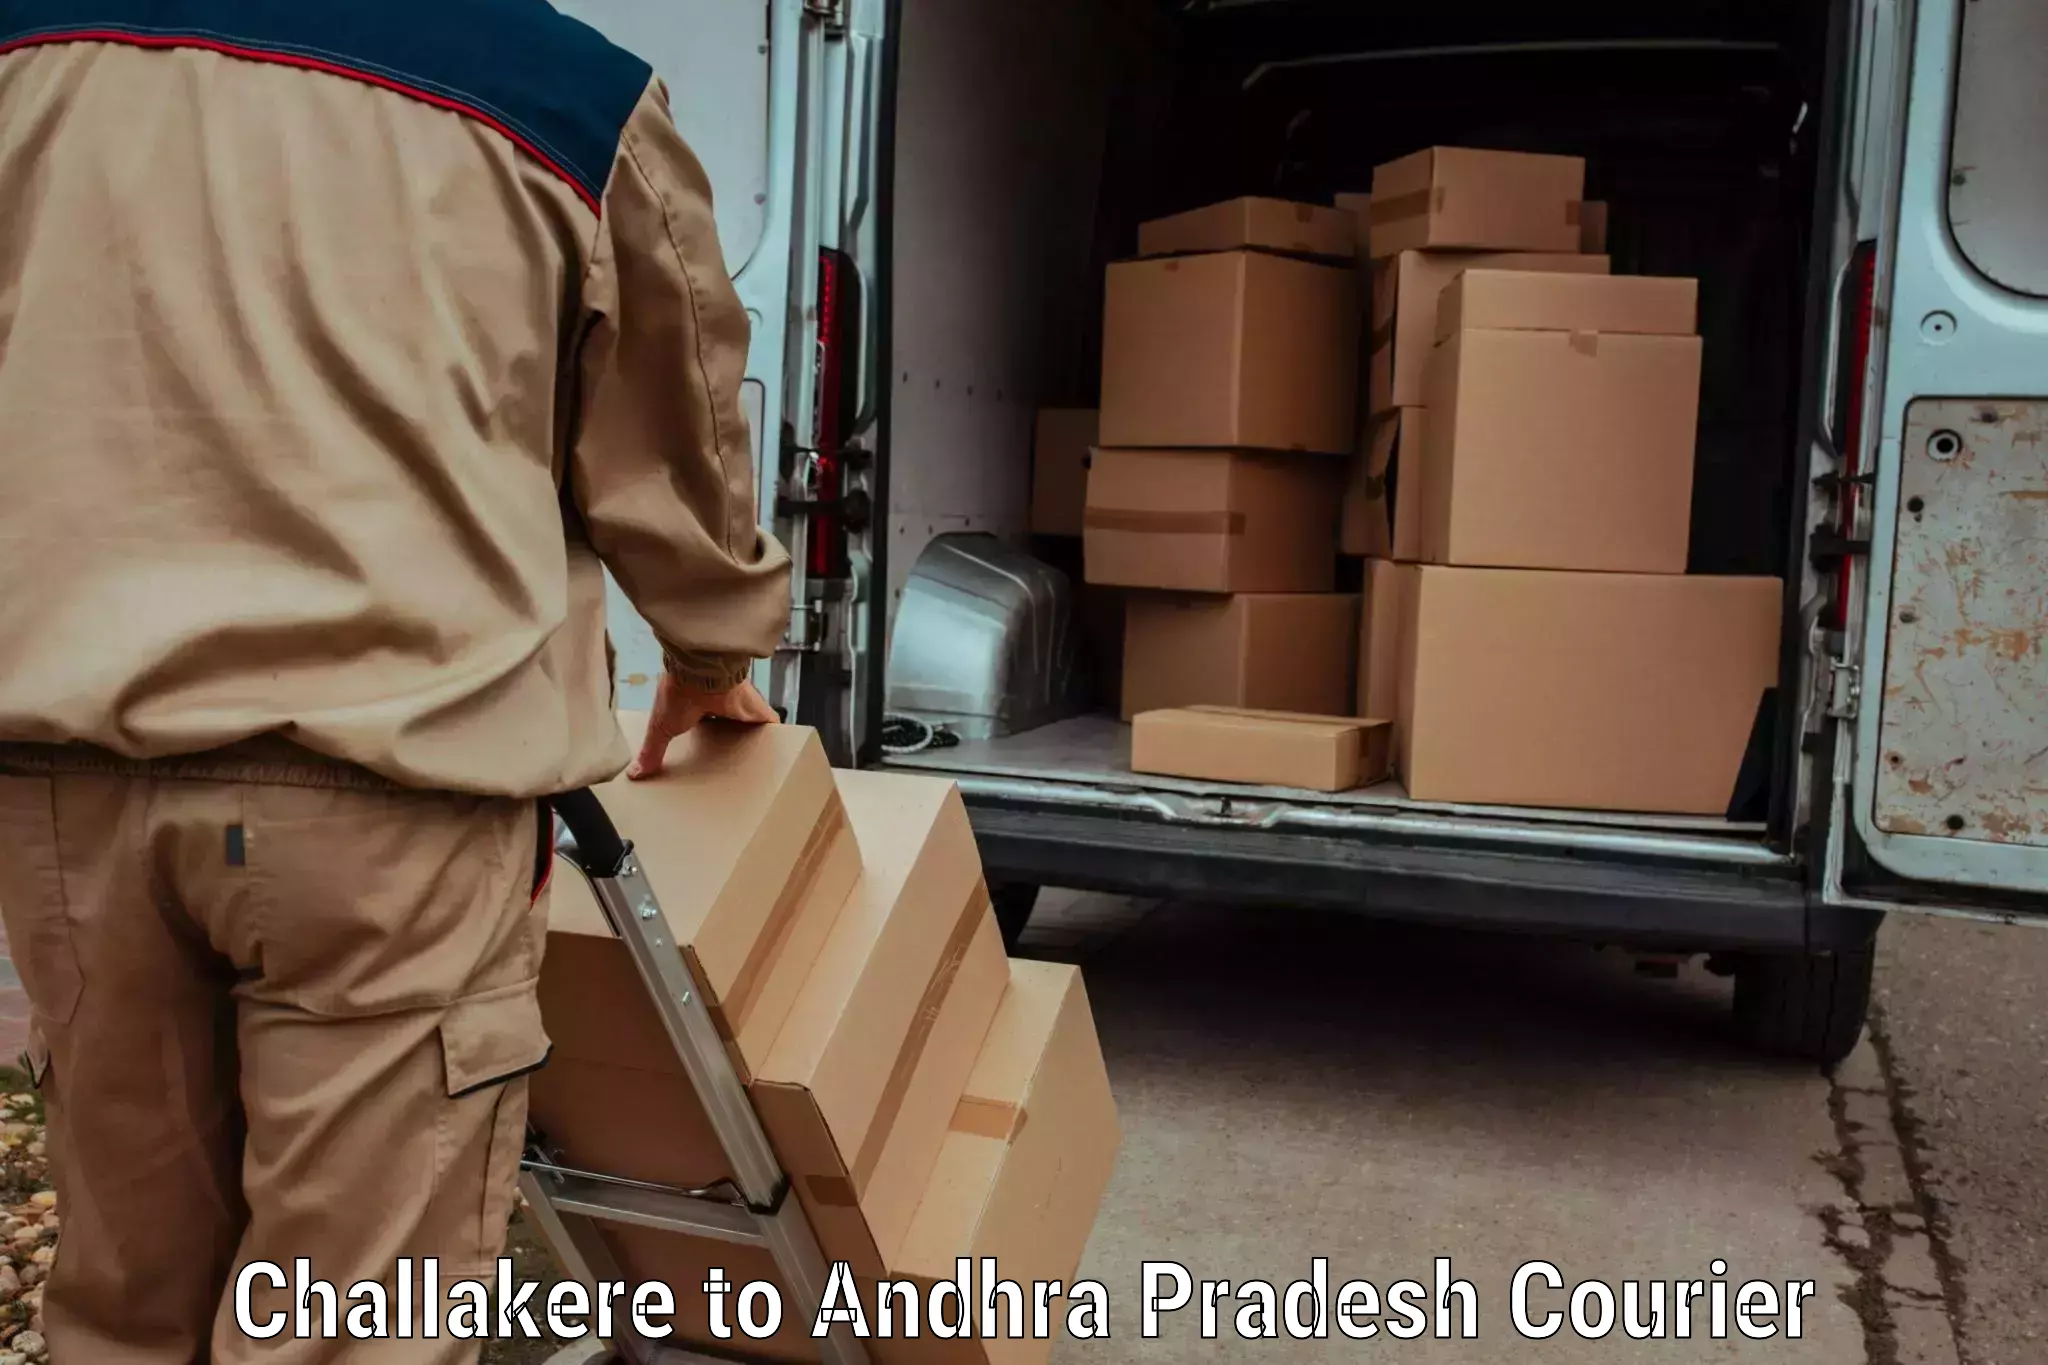 Nationwide shipping capabilities Challakere to Rajahmundry